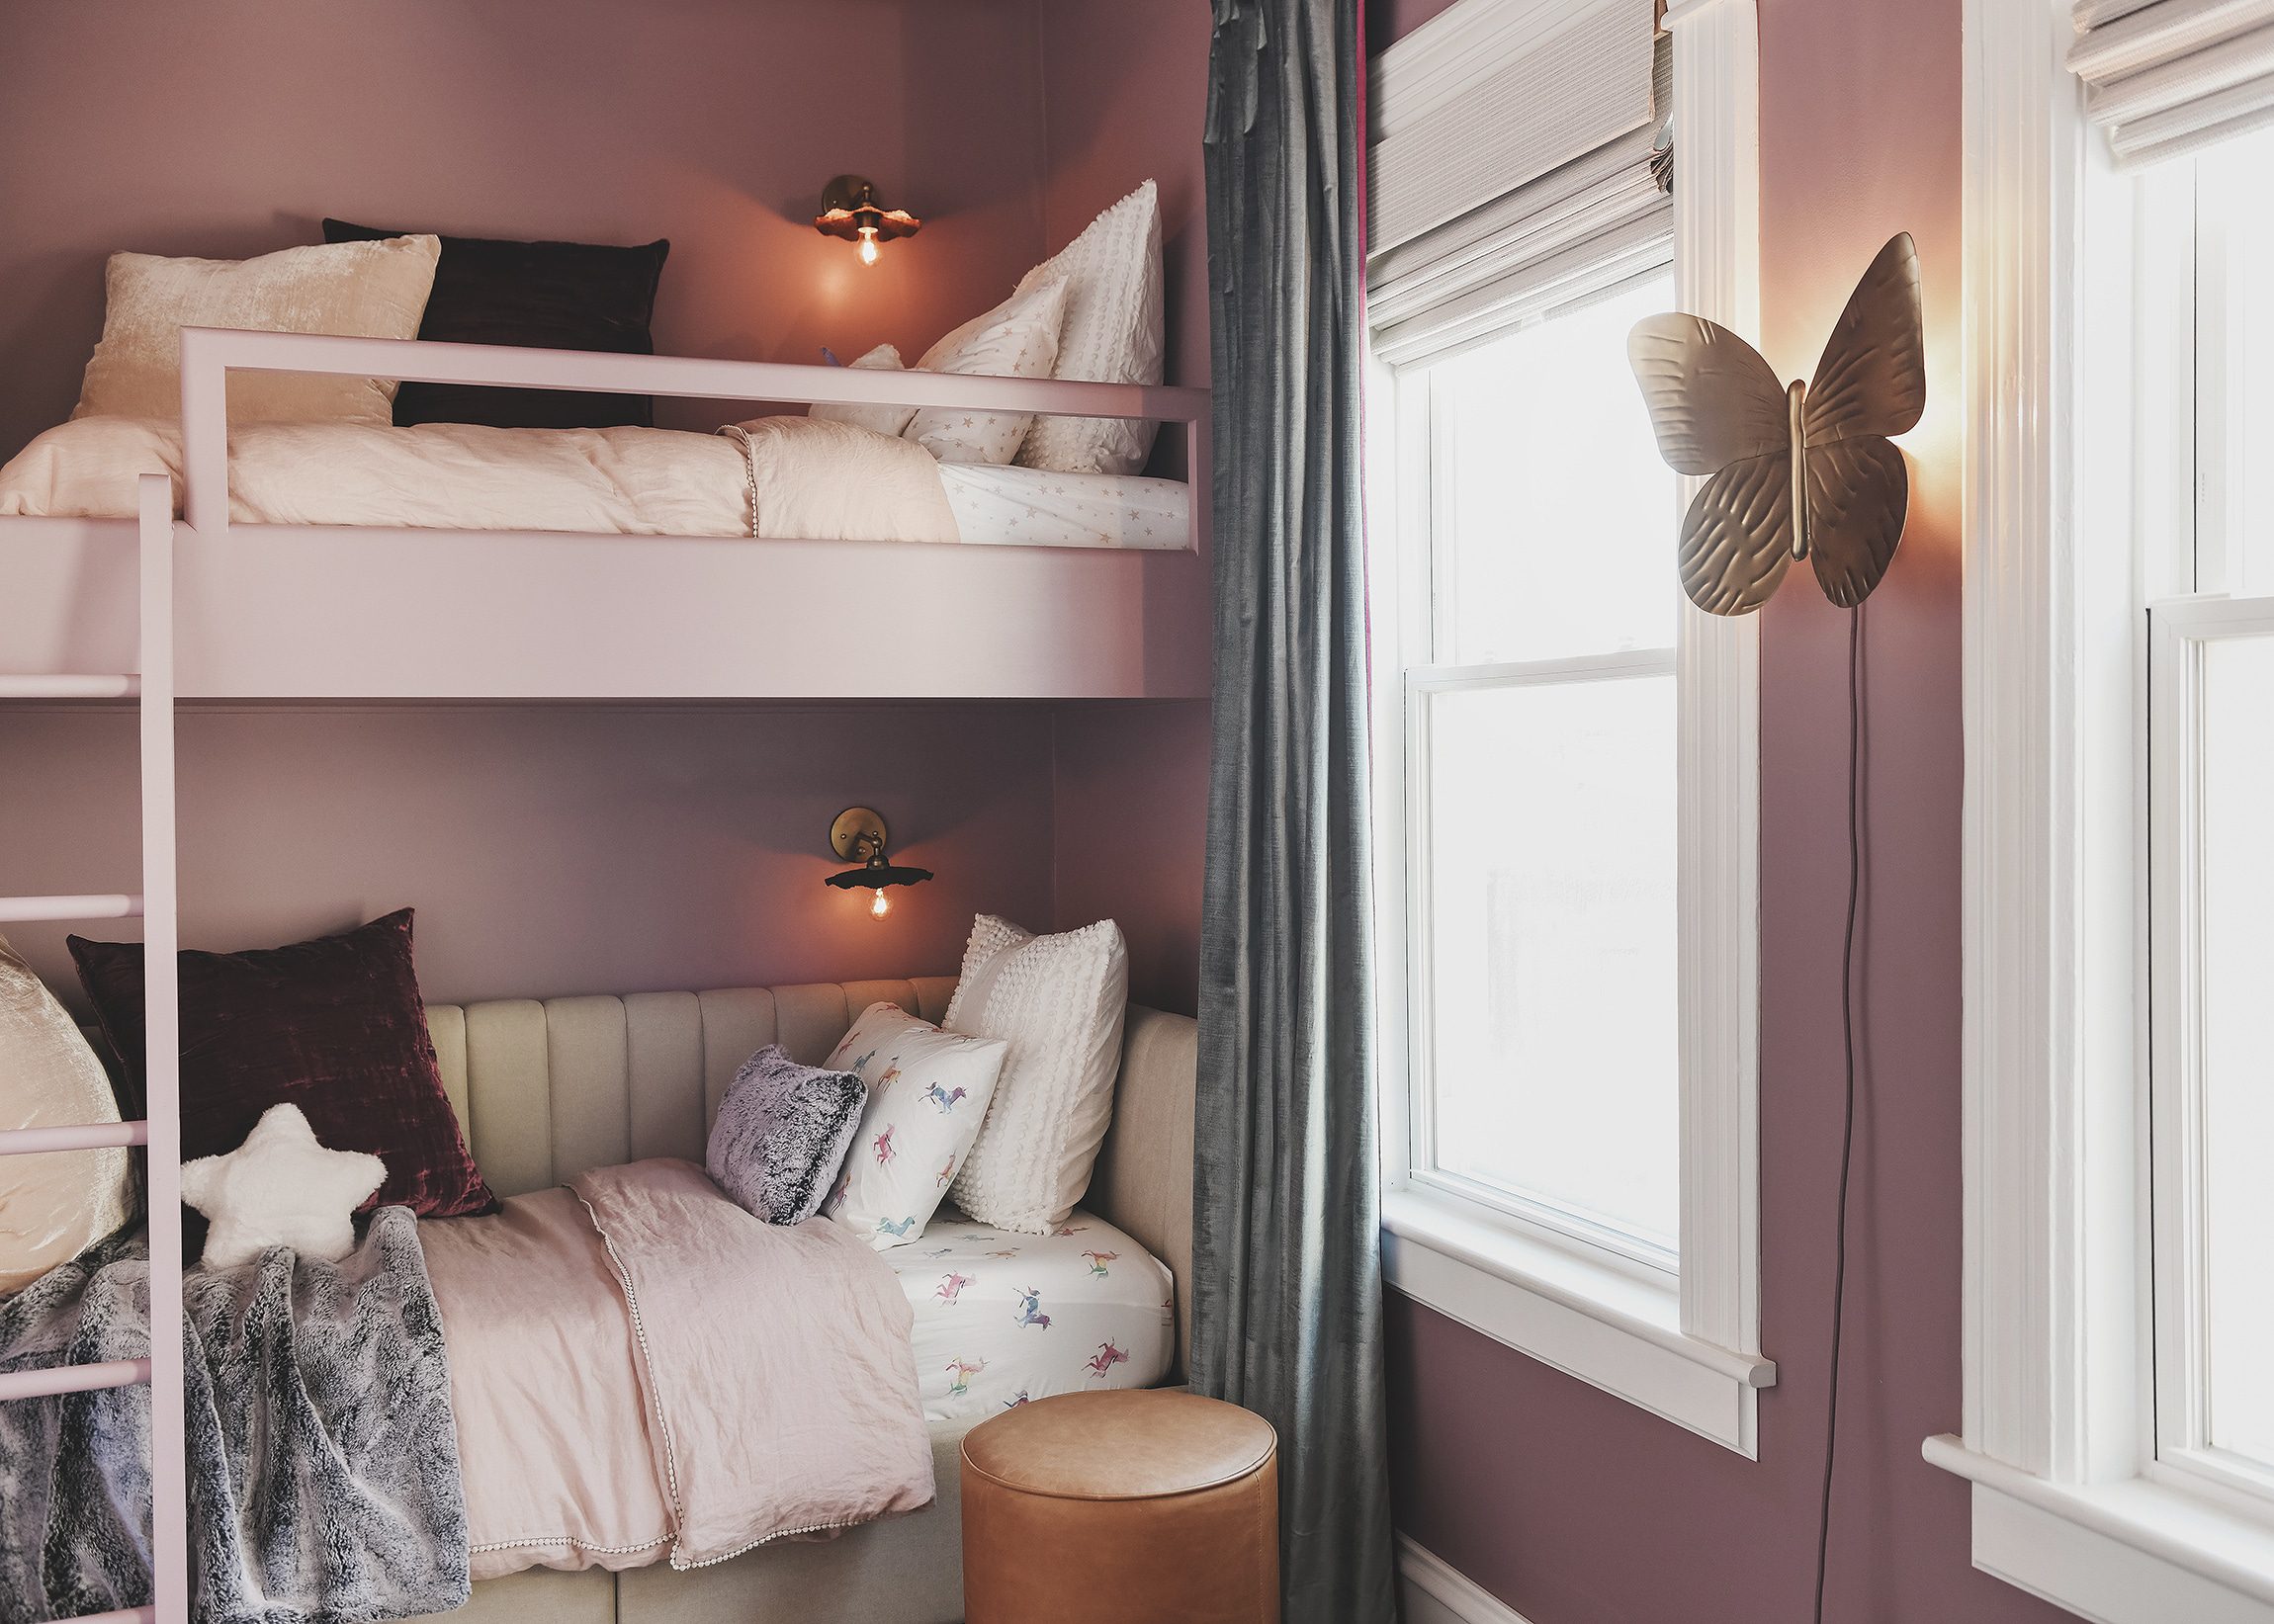 Butterfly sconce and bunk beds with purple walls in big kid bedroom | purple and unicorn bedroom for a big kid via Yellow Brick Home